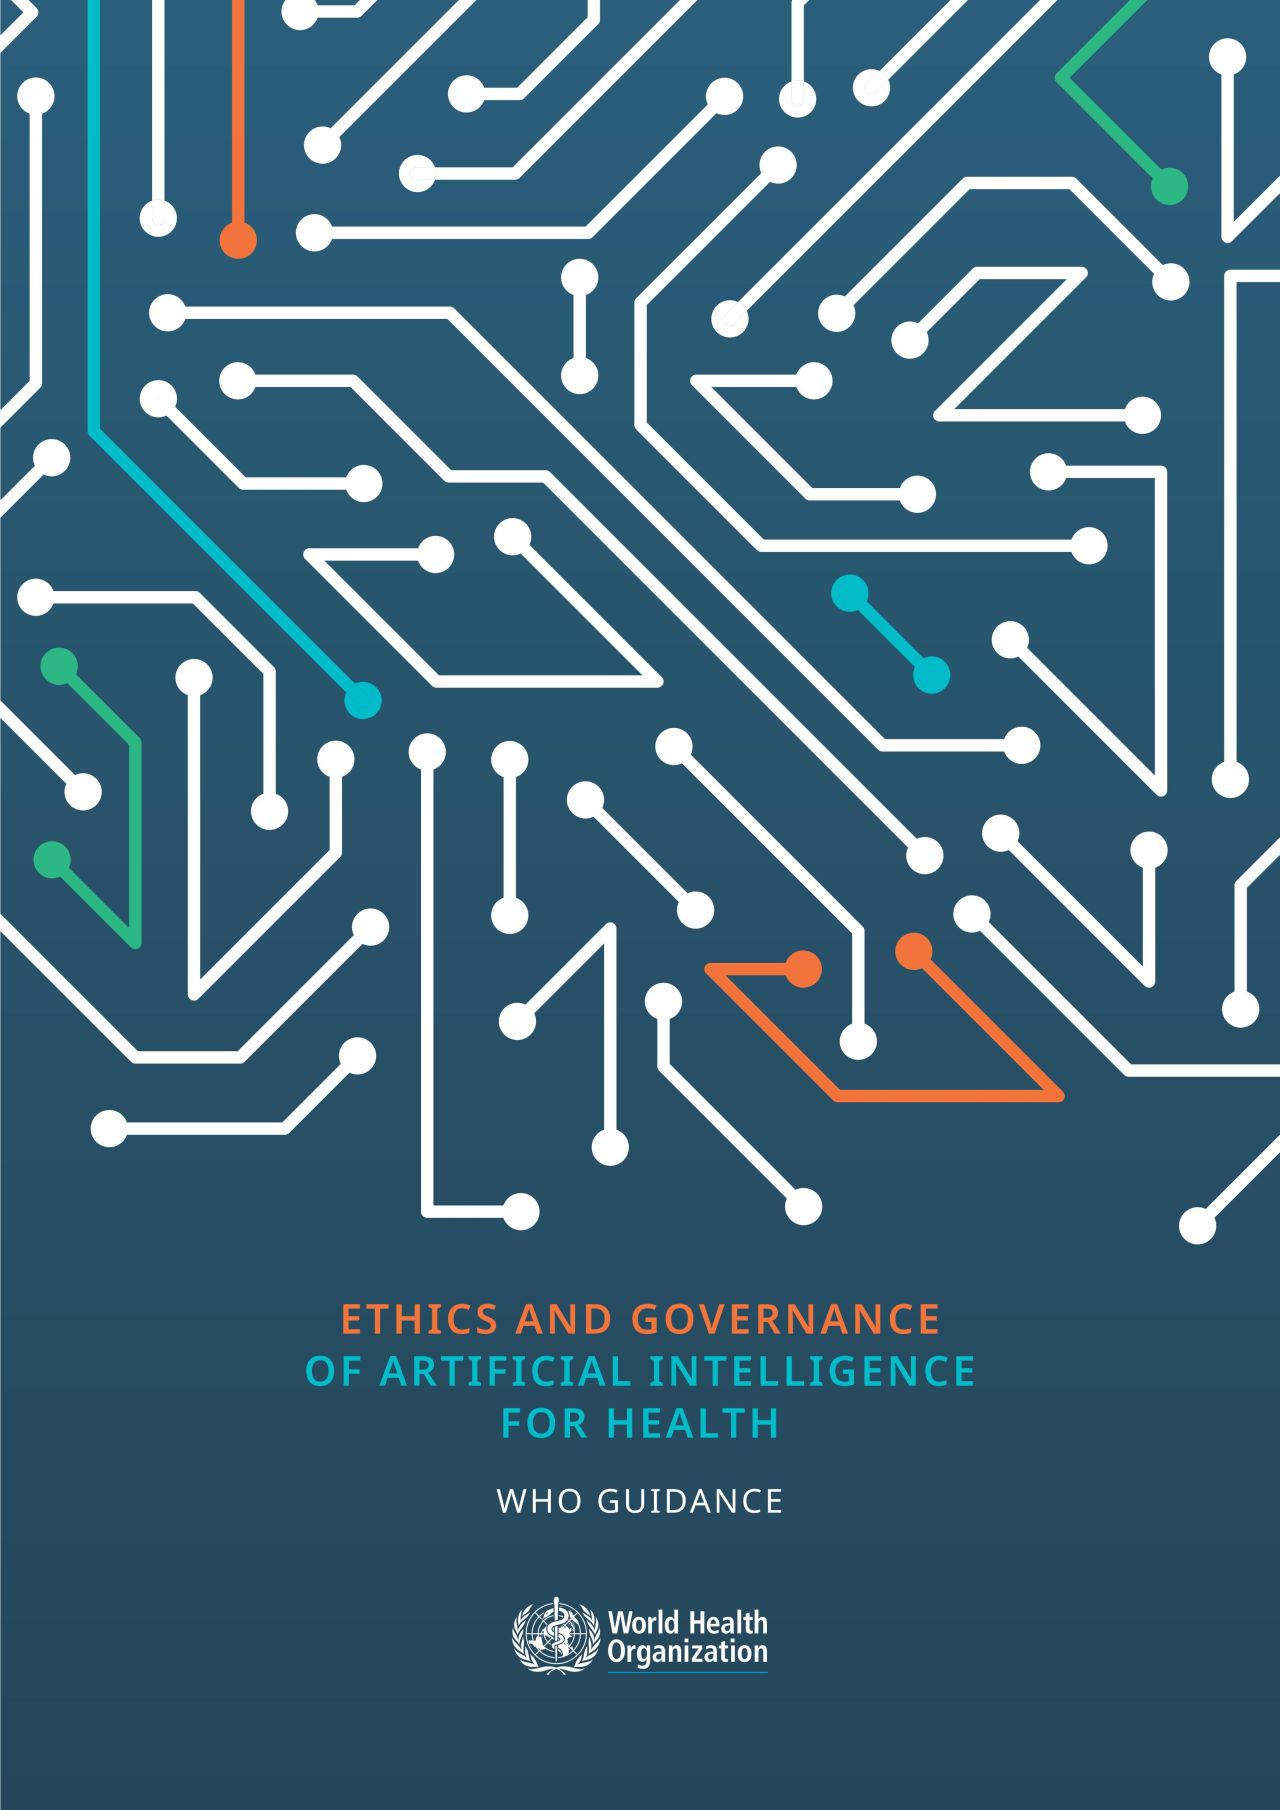 La copertina del documento "Ethics and governance of artificial intelligence for health WHO guidance"